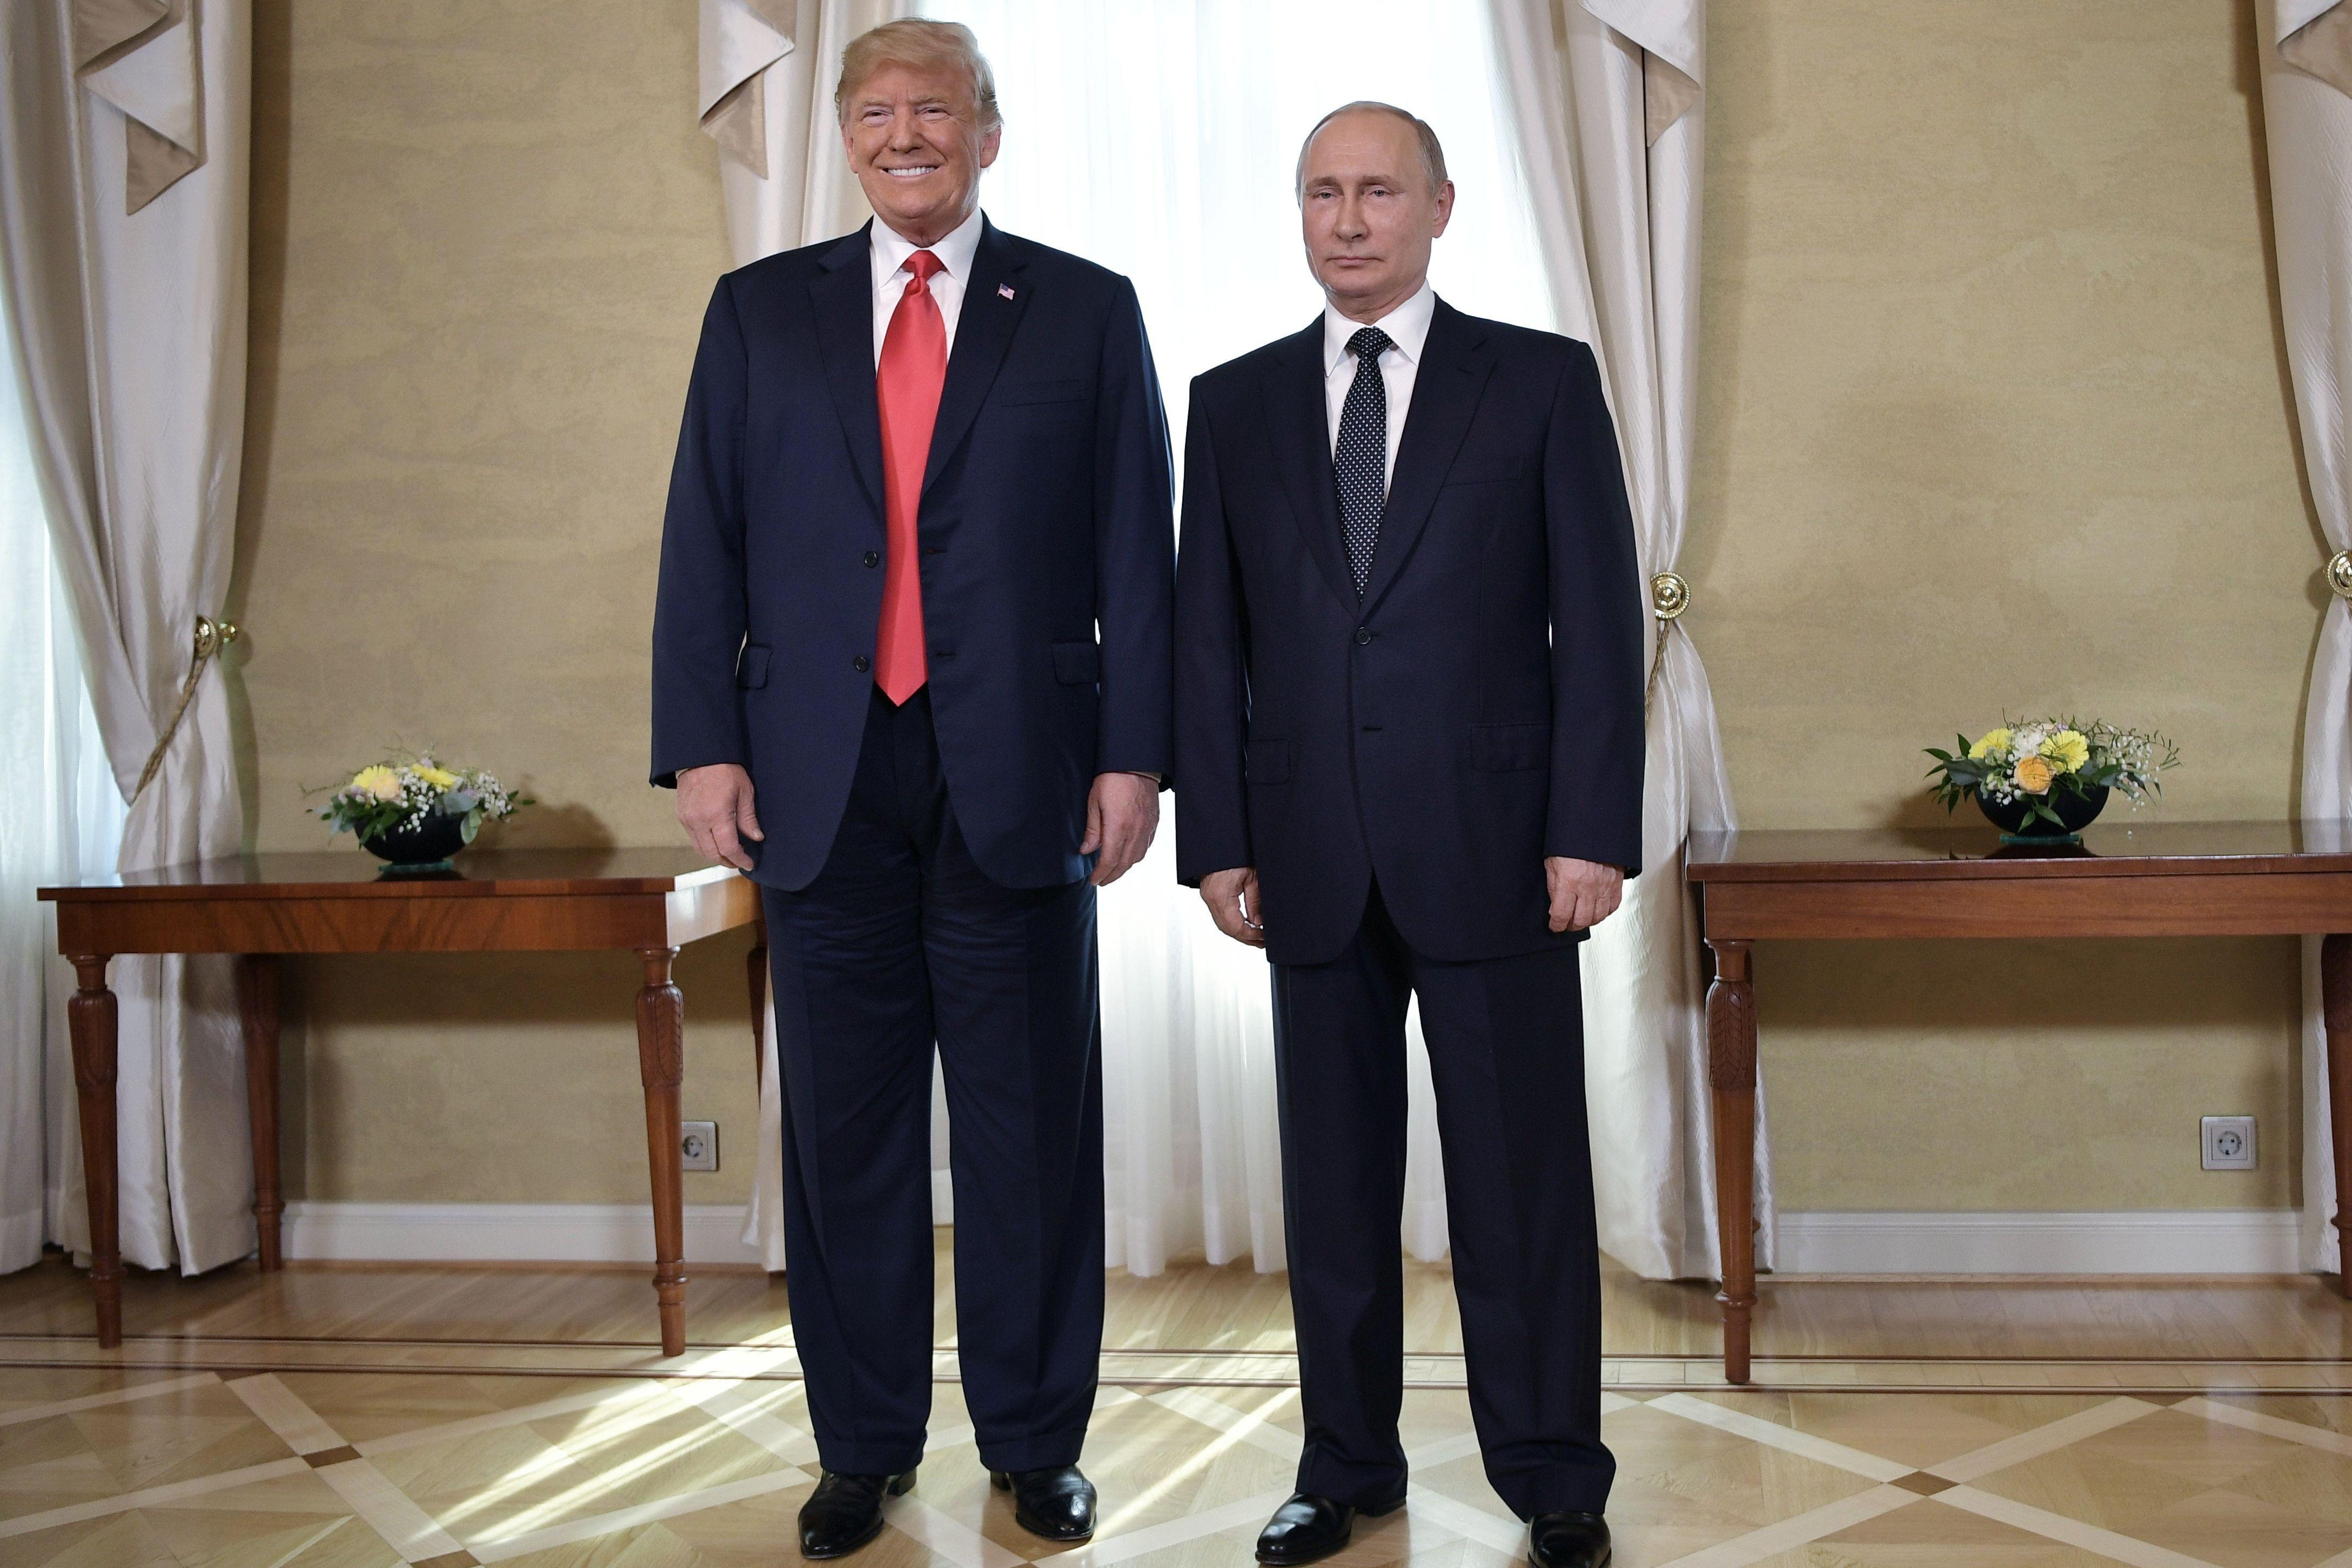 President Donald Trump and Russia's President Vladimir Putin pose ahead a meeting in Helsinki, on July 16, 2018.